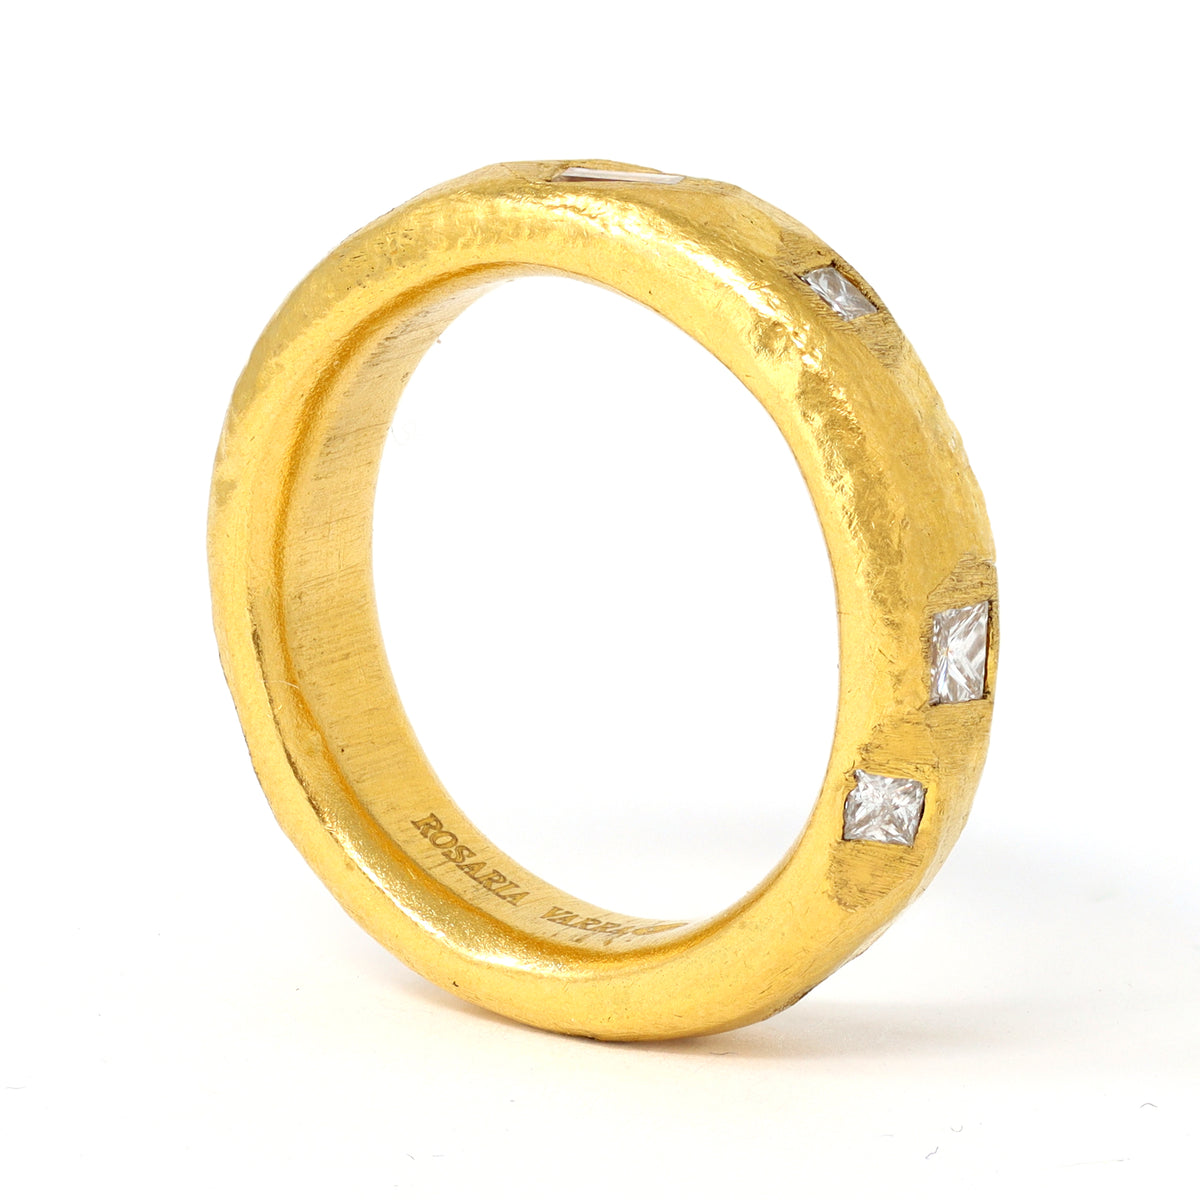 Rosaria Varra Diamond Band Ring in 24K Gold side angle view